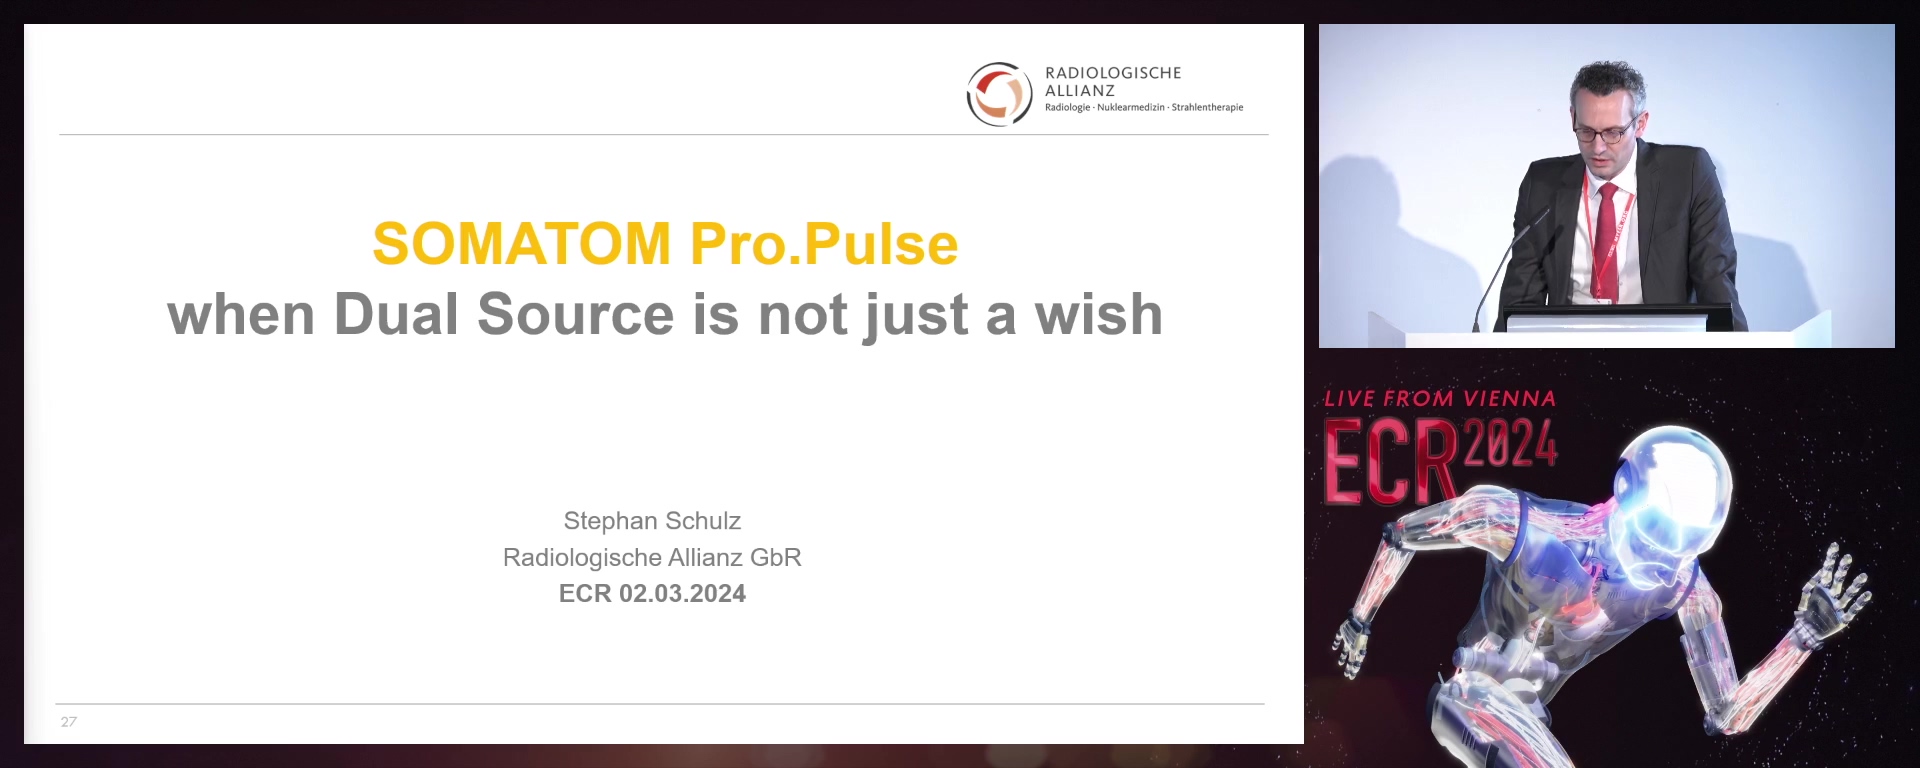 SOMATOM Pro.Pulse – when Dual Source is not just a wish.